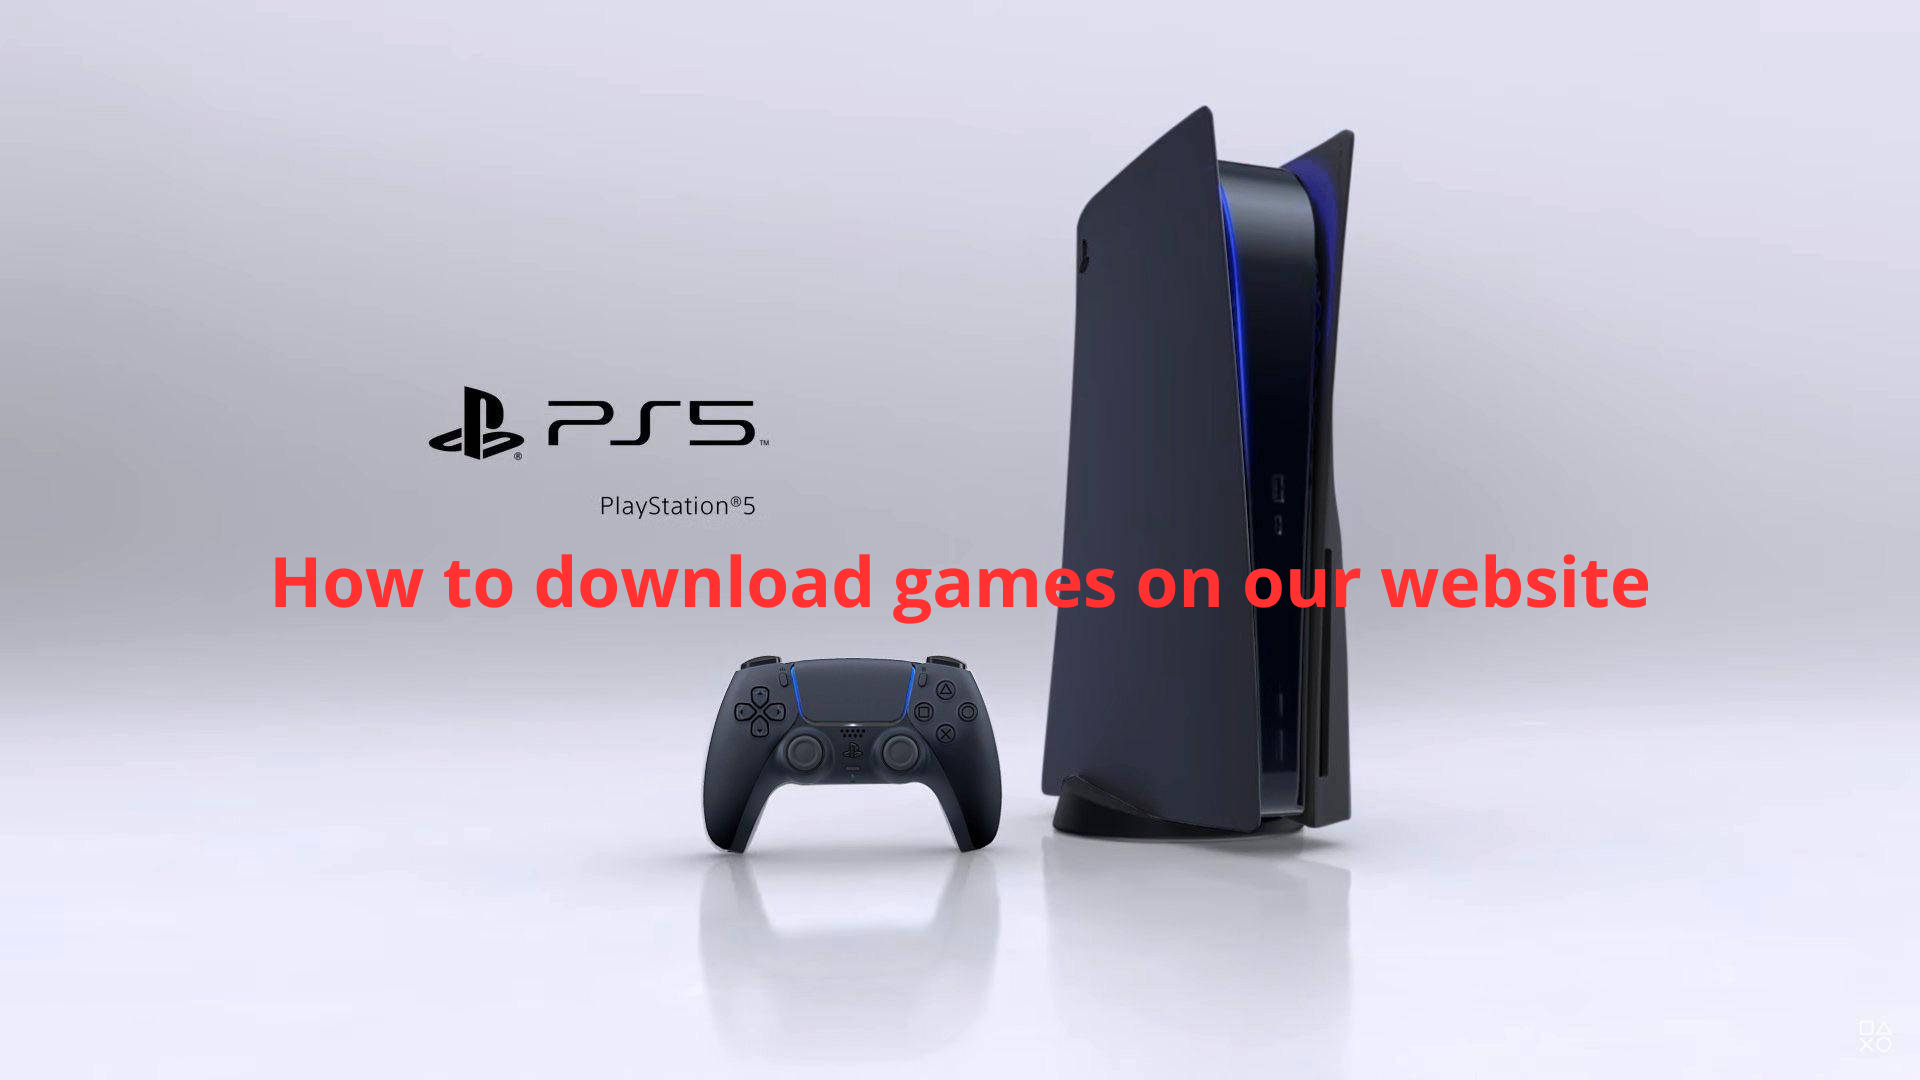 How to download games on our website